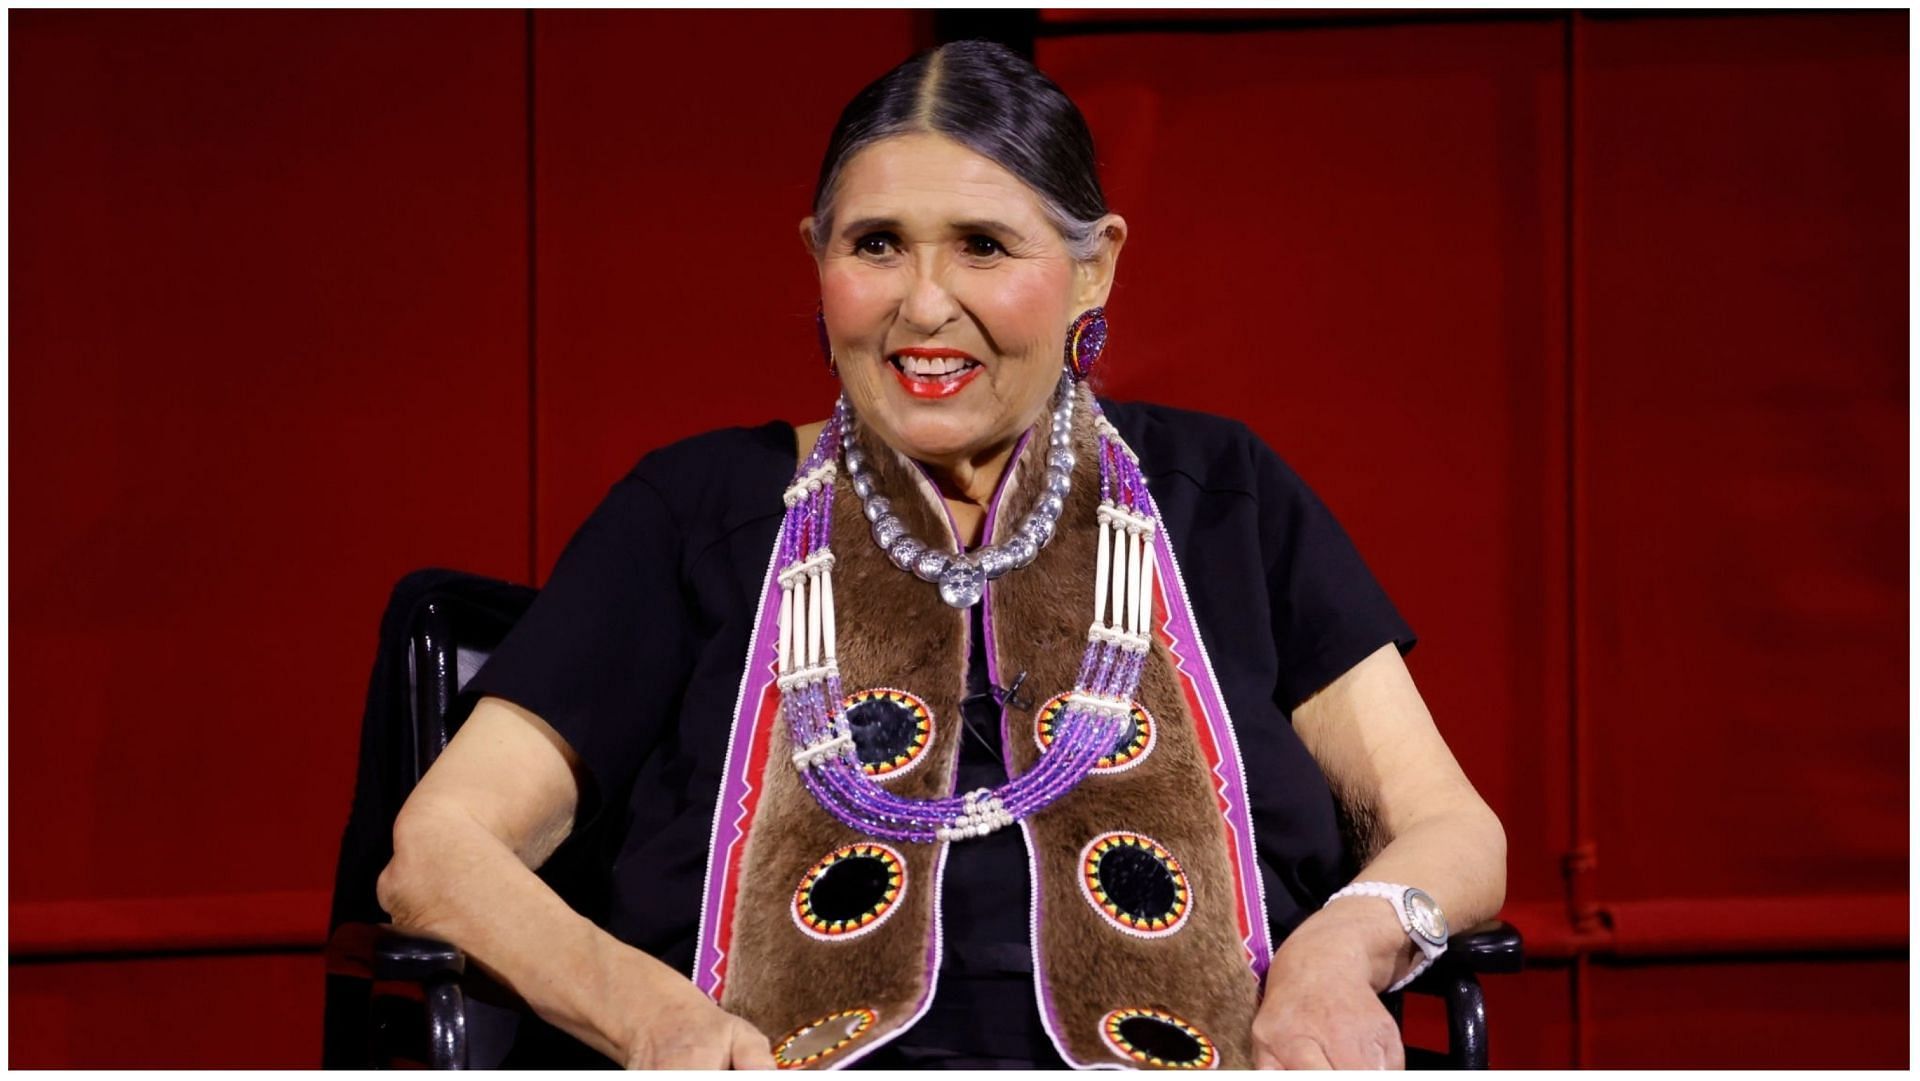 Sacheen Littlefeather recently died at the age of 75 (Image via Frazer Harrison/Getty Images)